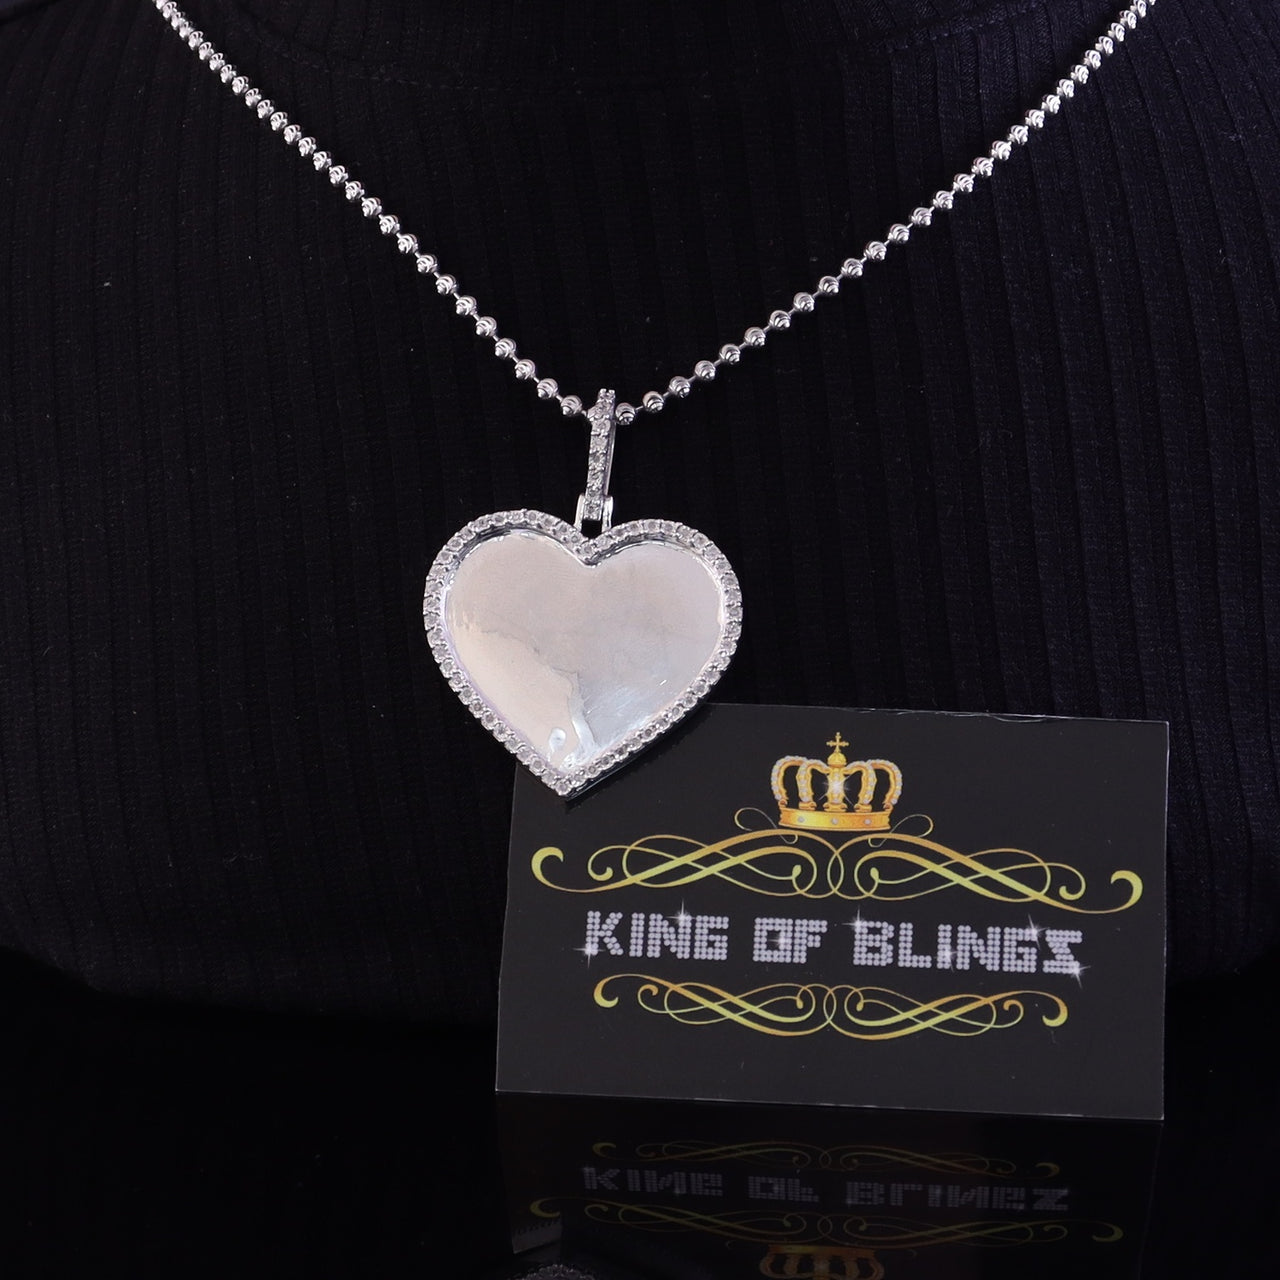 King Of Bling's Real 0.33ct Diamond 925 Sterling Silver "1.50" Heart PICTURE Charm White Pendant KING OF BLINGS